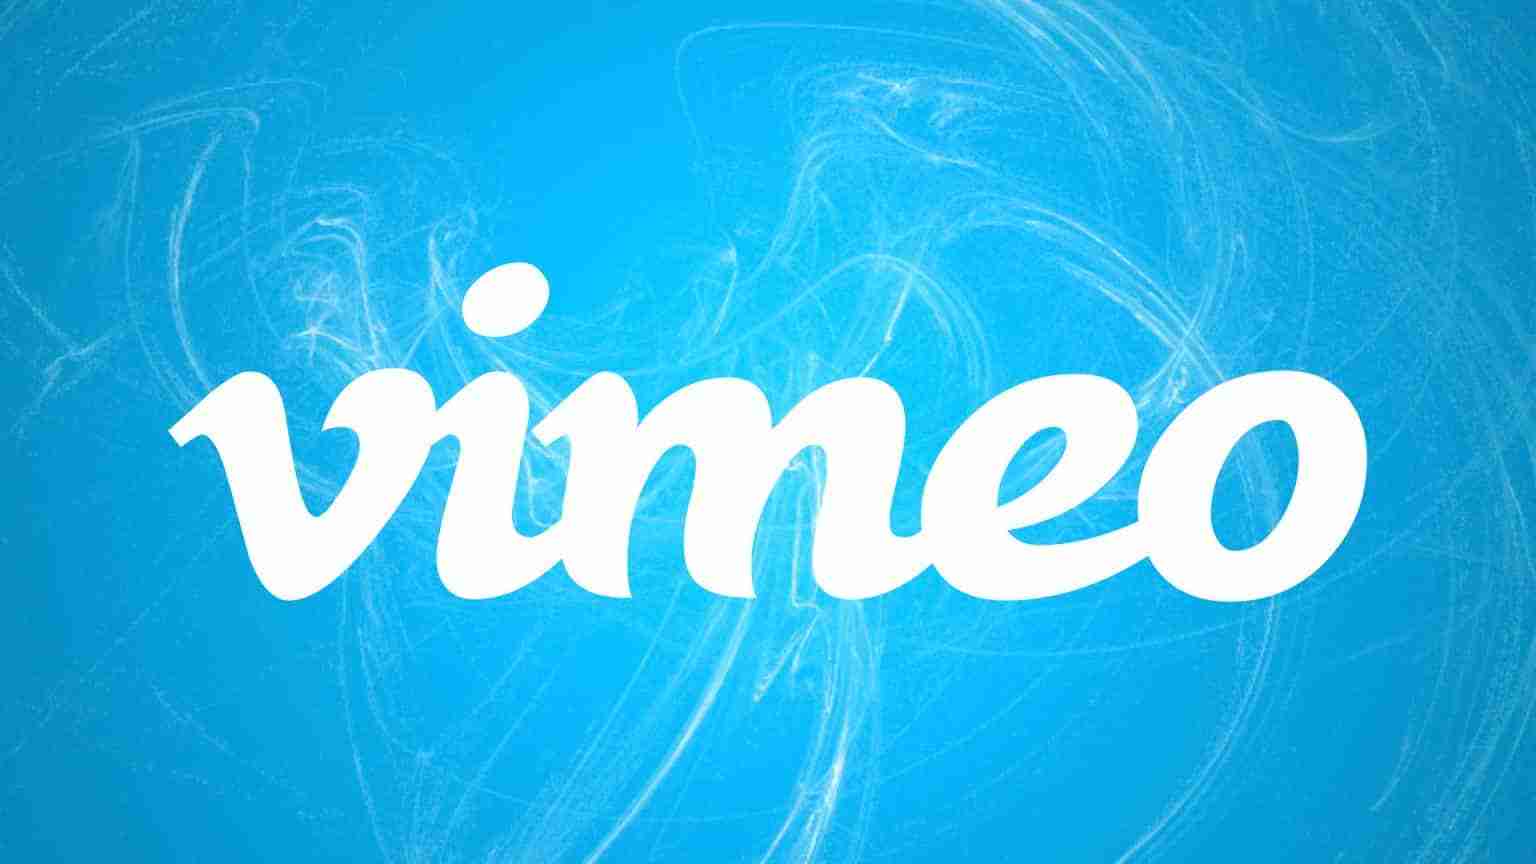 create a vimeo on demand discount coupon code